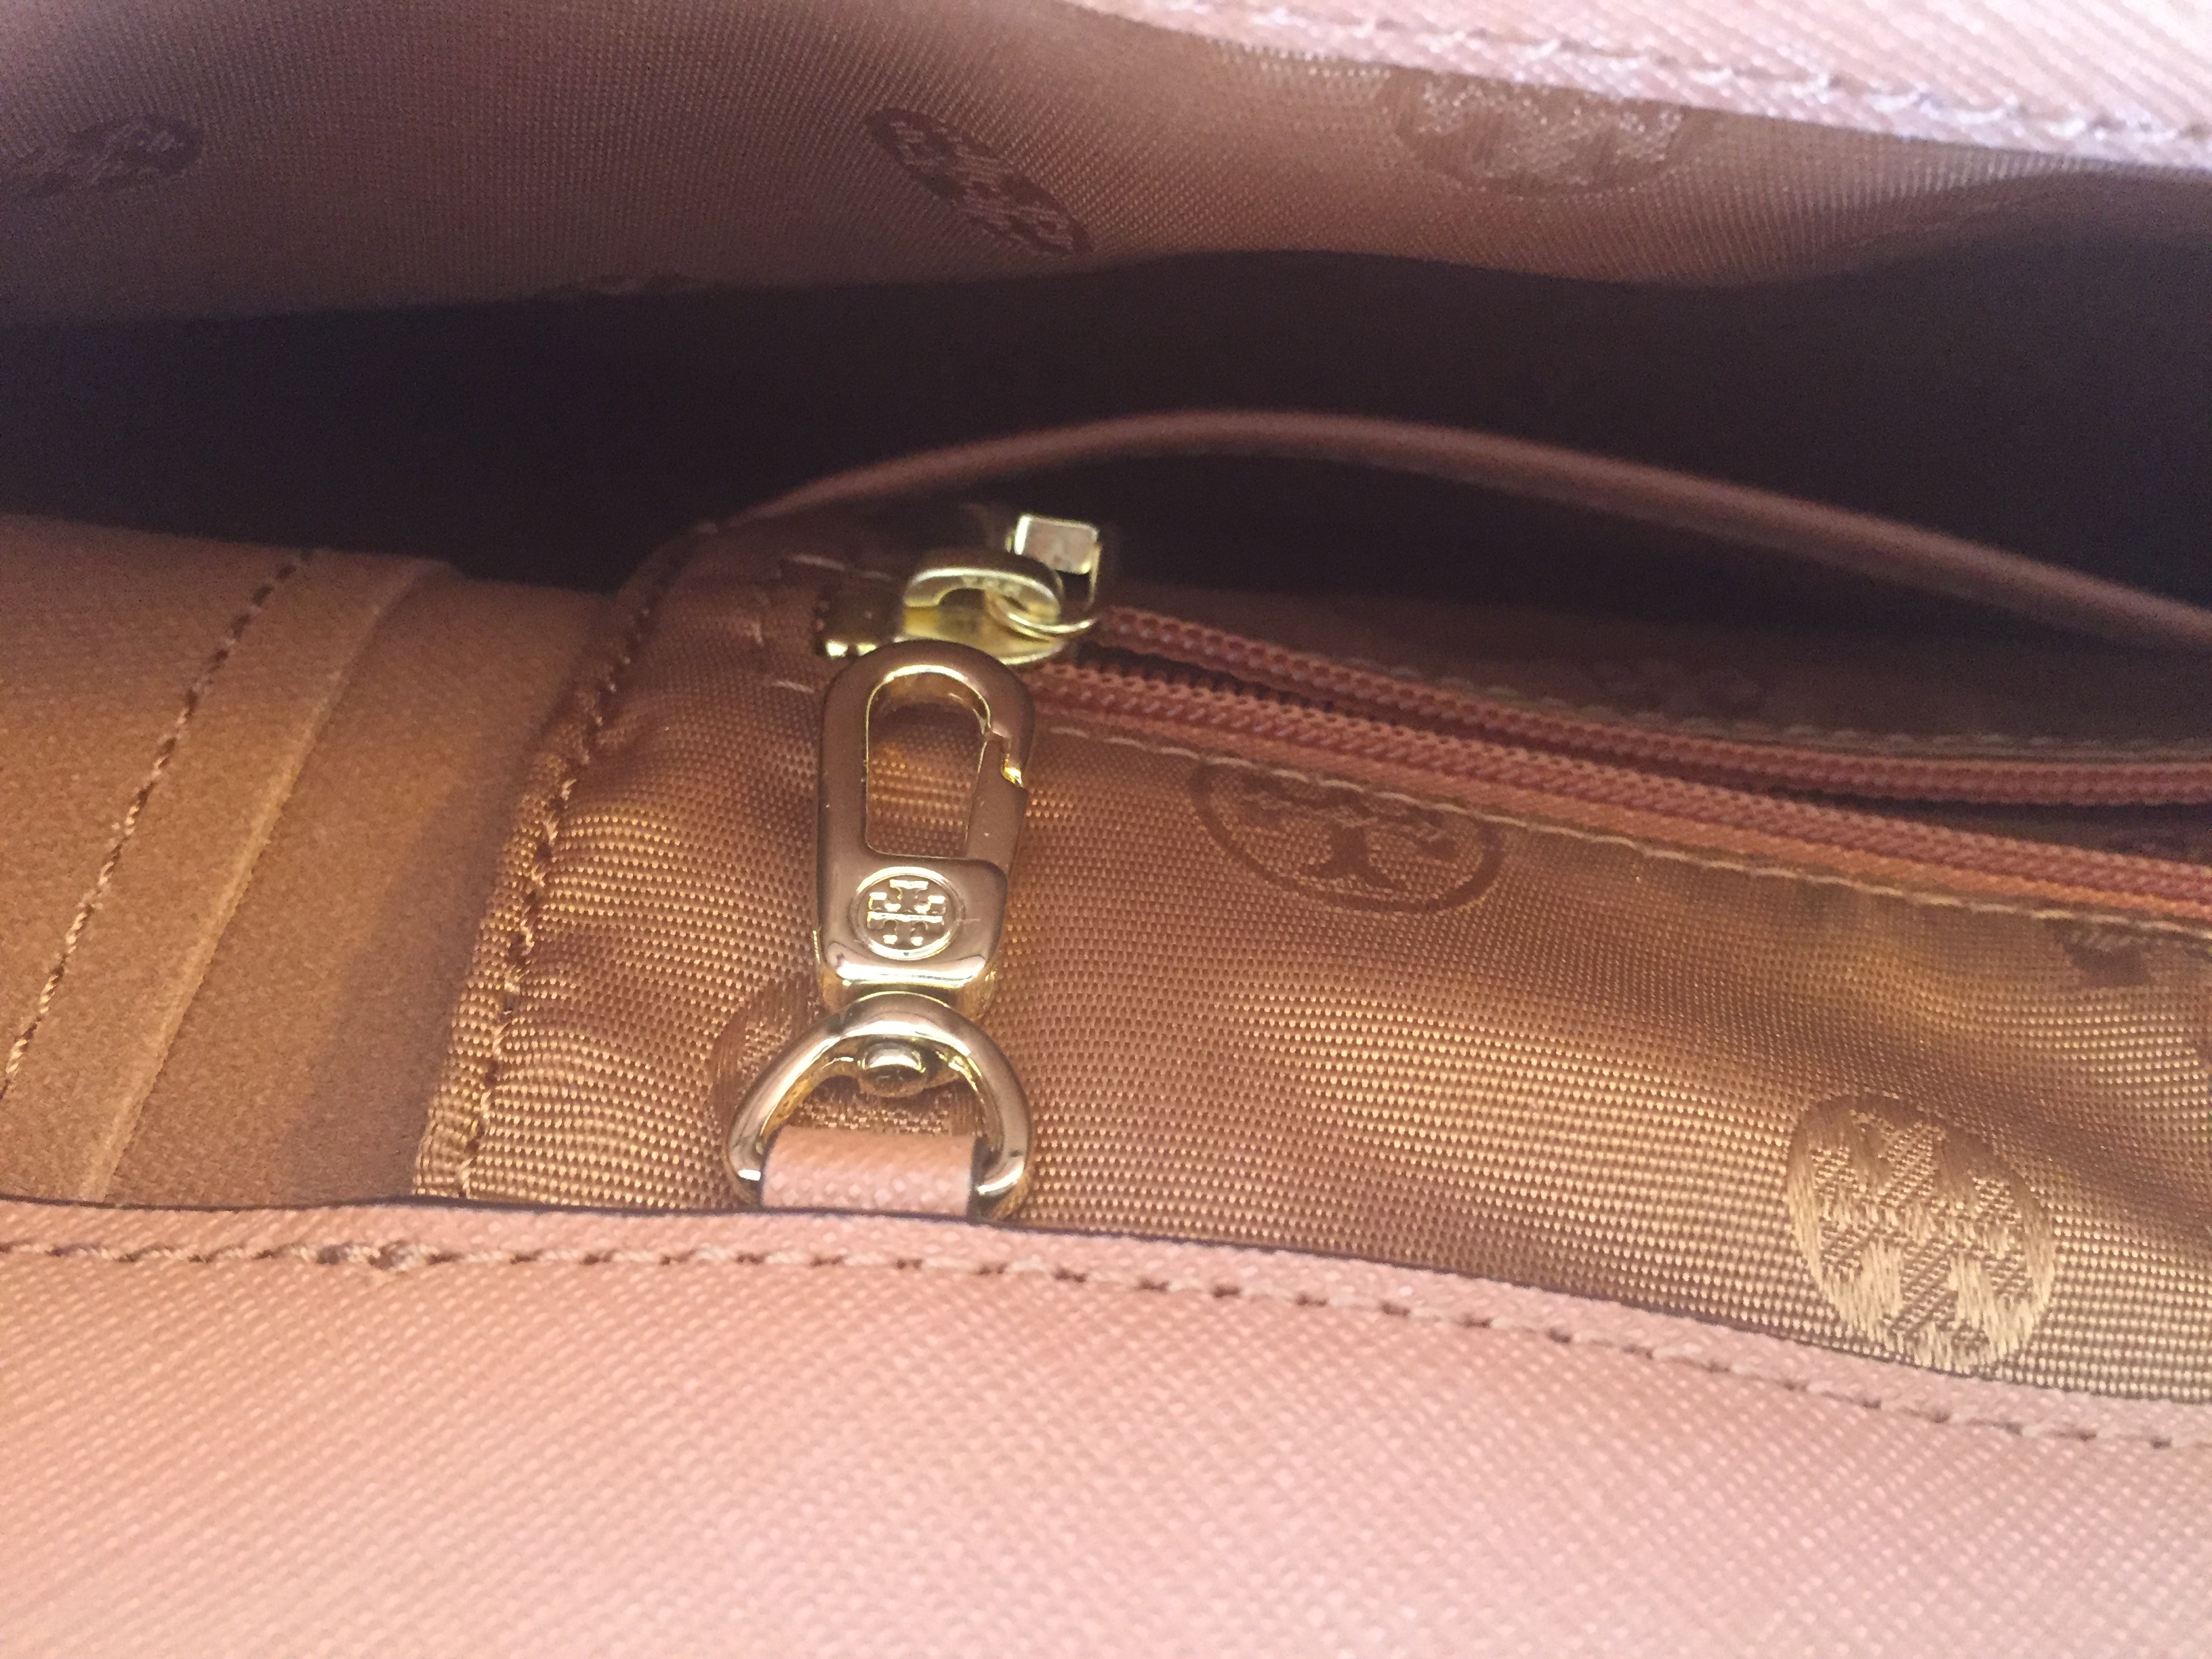 Review: Tory Burch York Saffiano Leather Buckle Tote - Elle Blogs